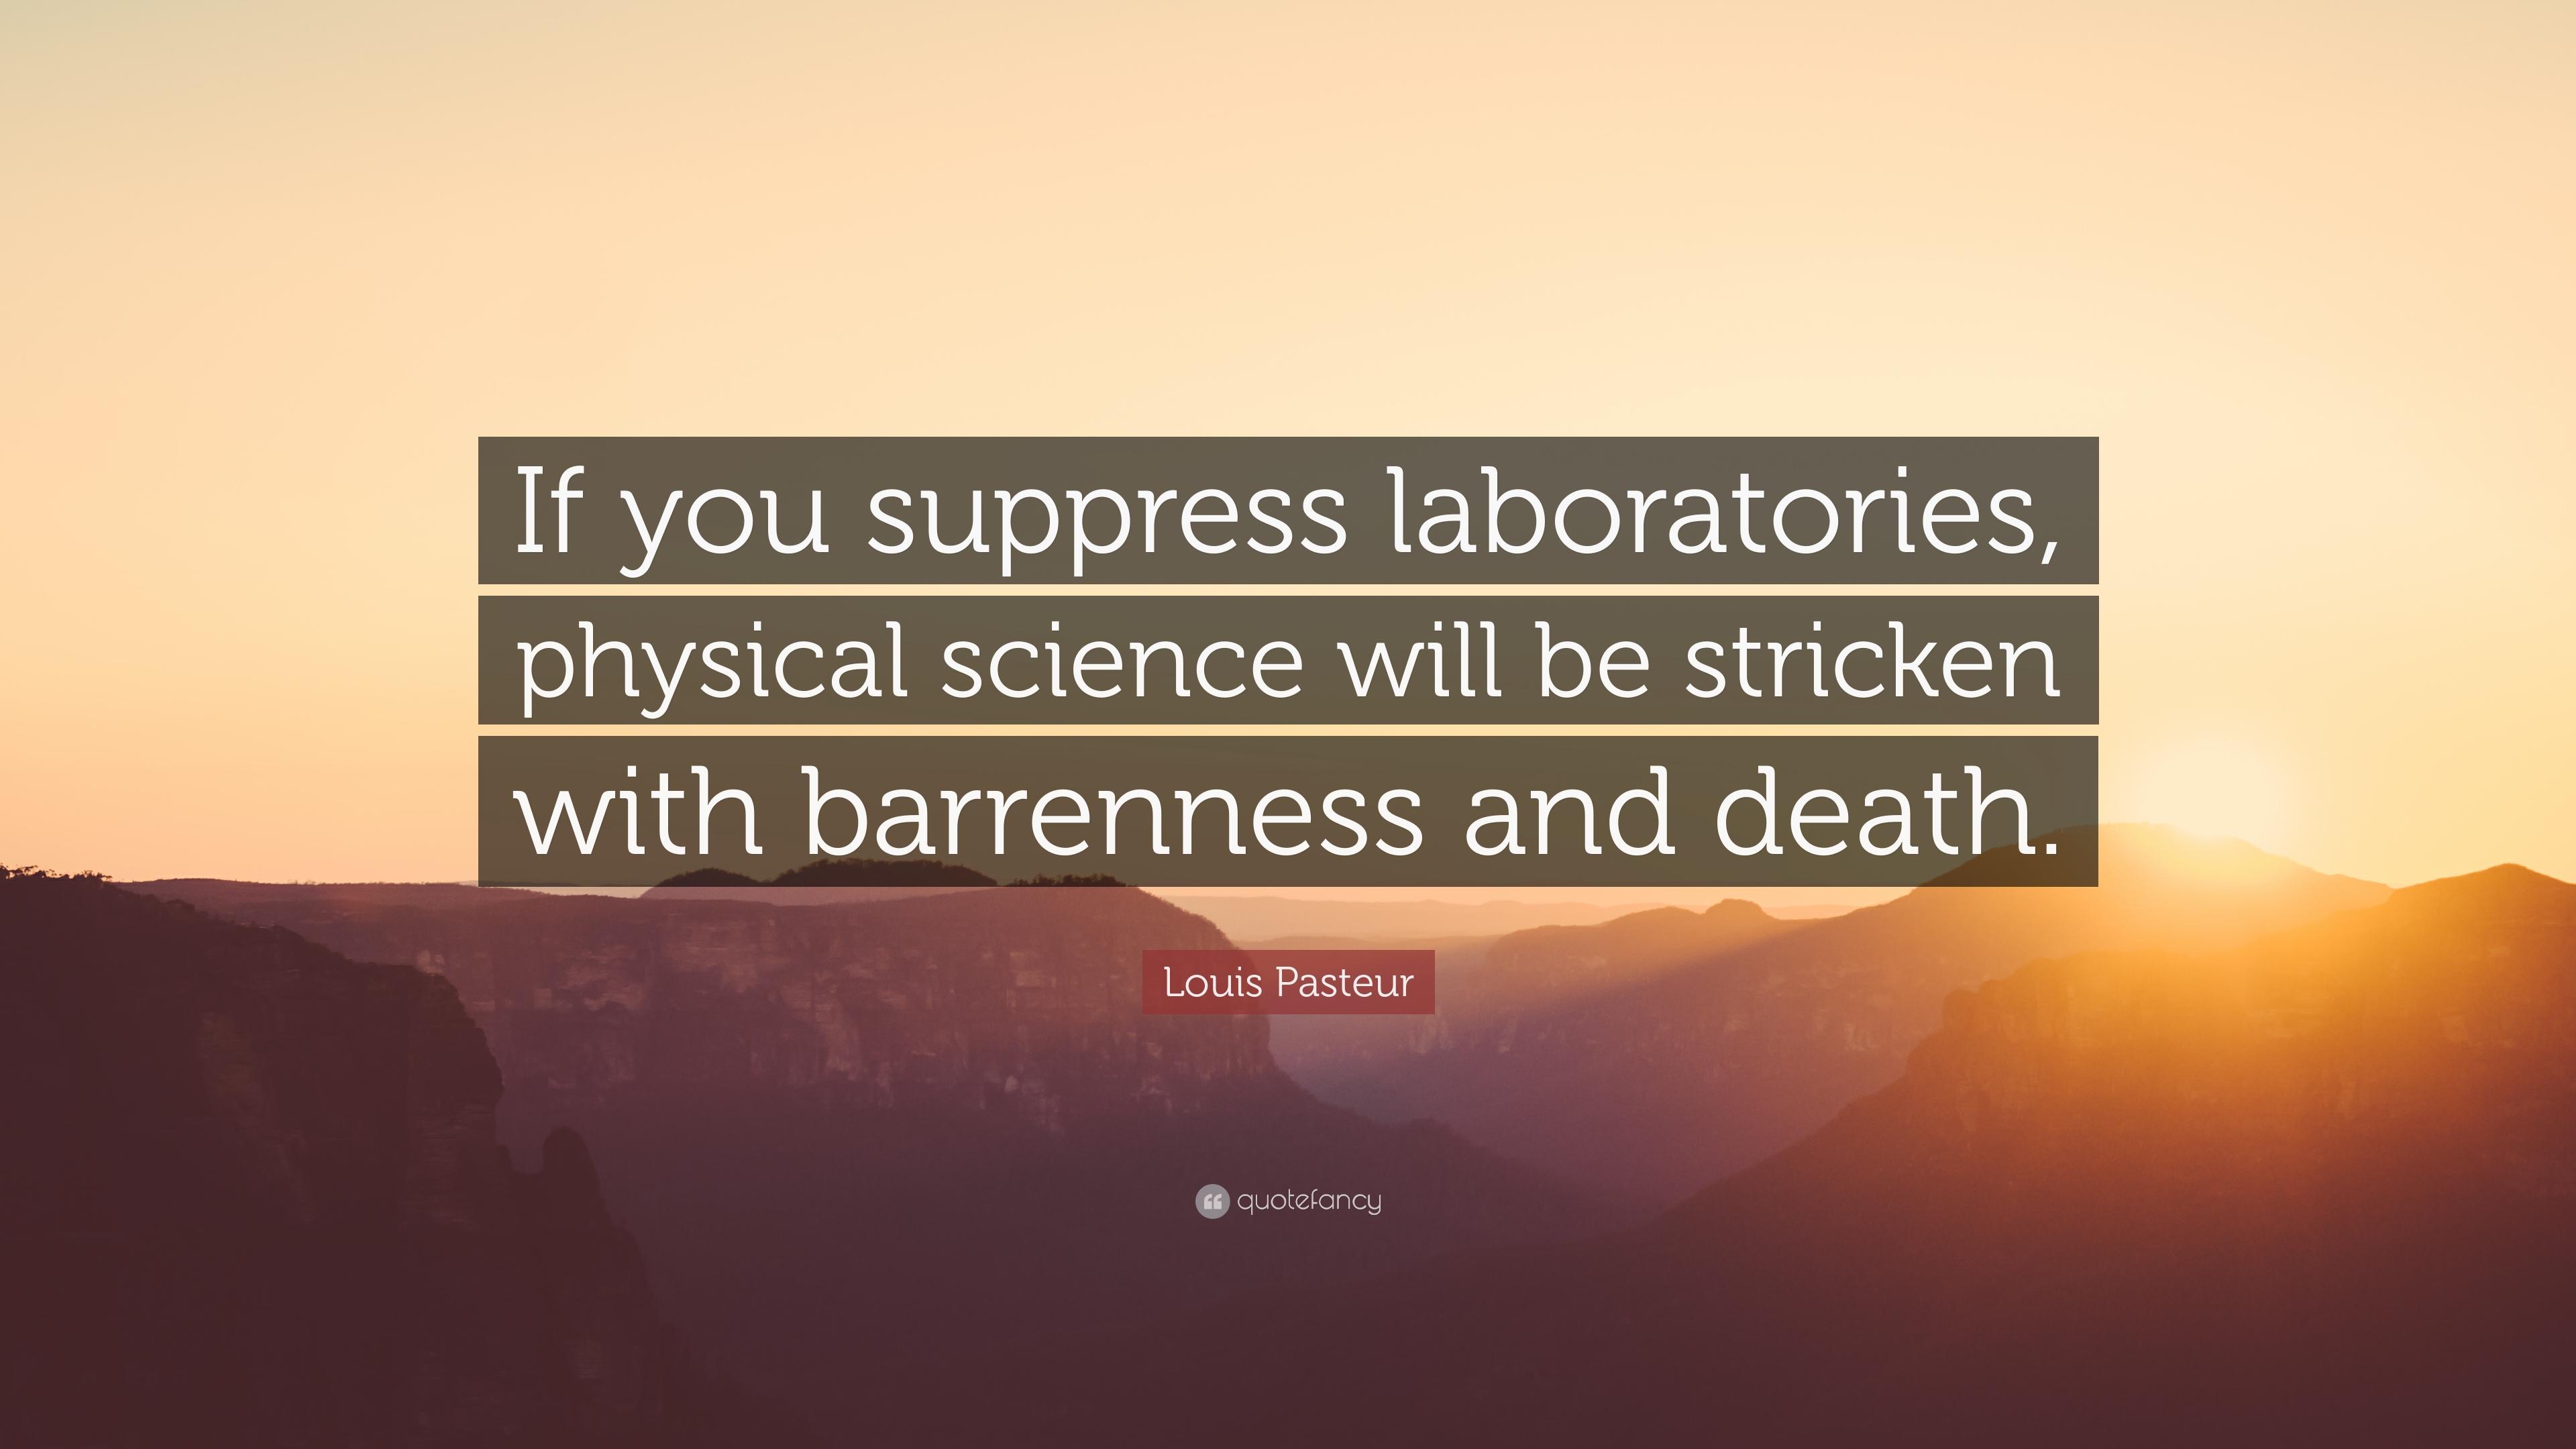 Louis Pasteur Quote: “If you suppress laboratories, physical science